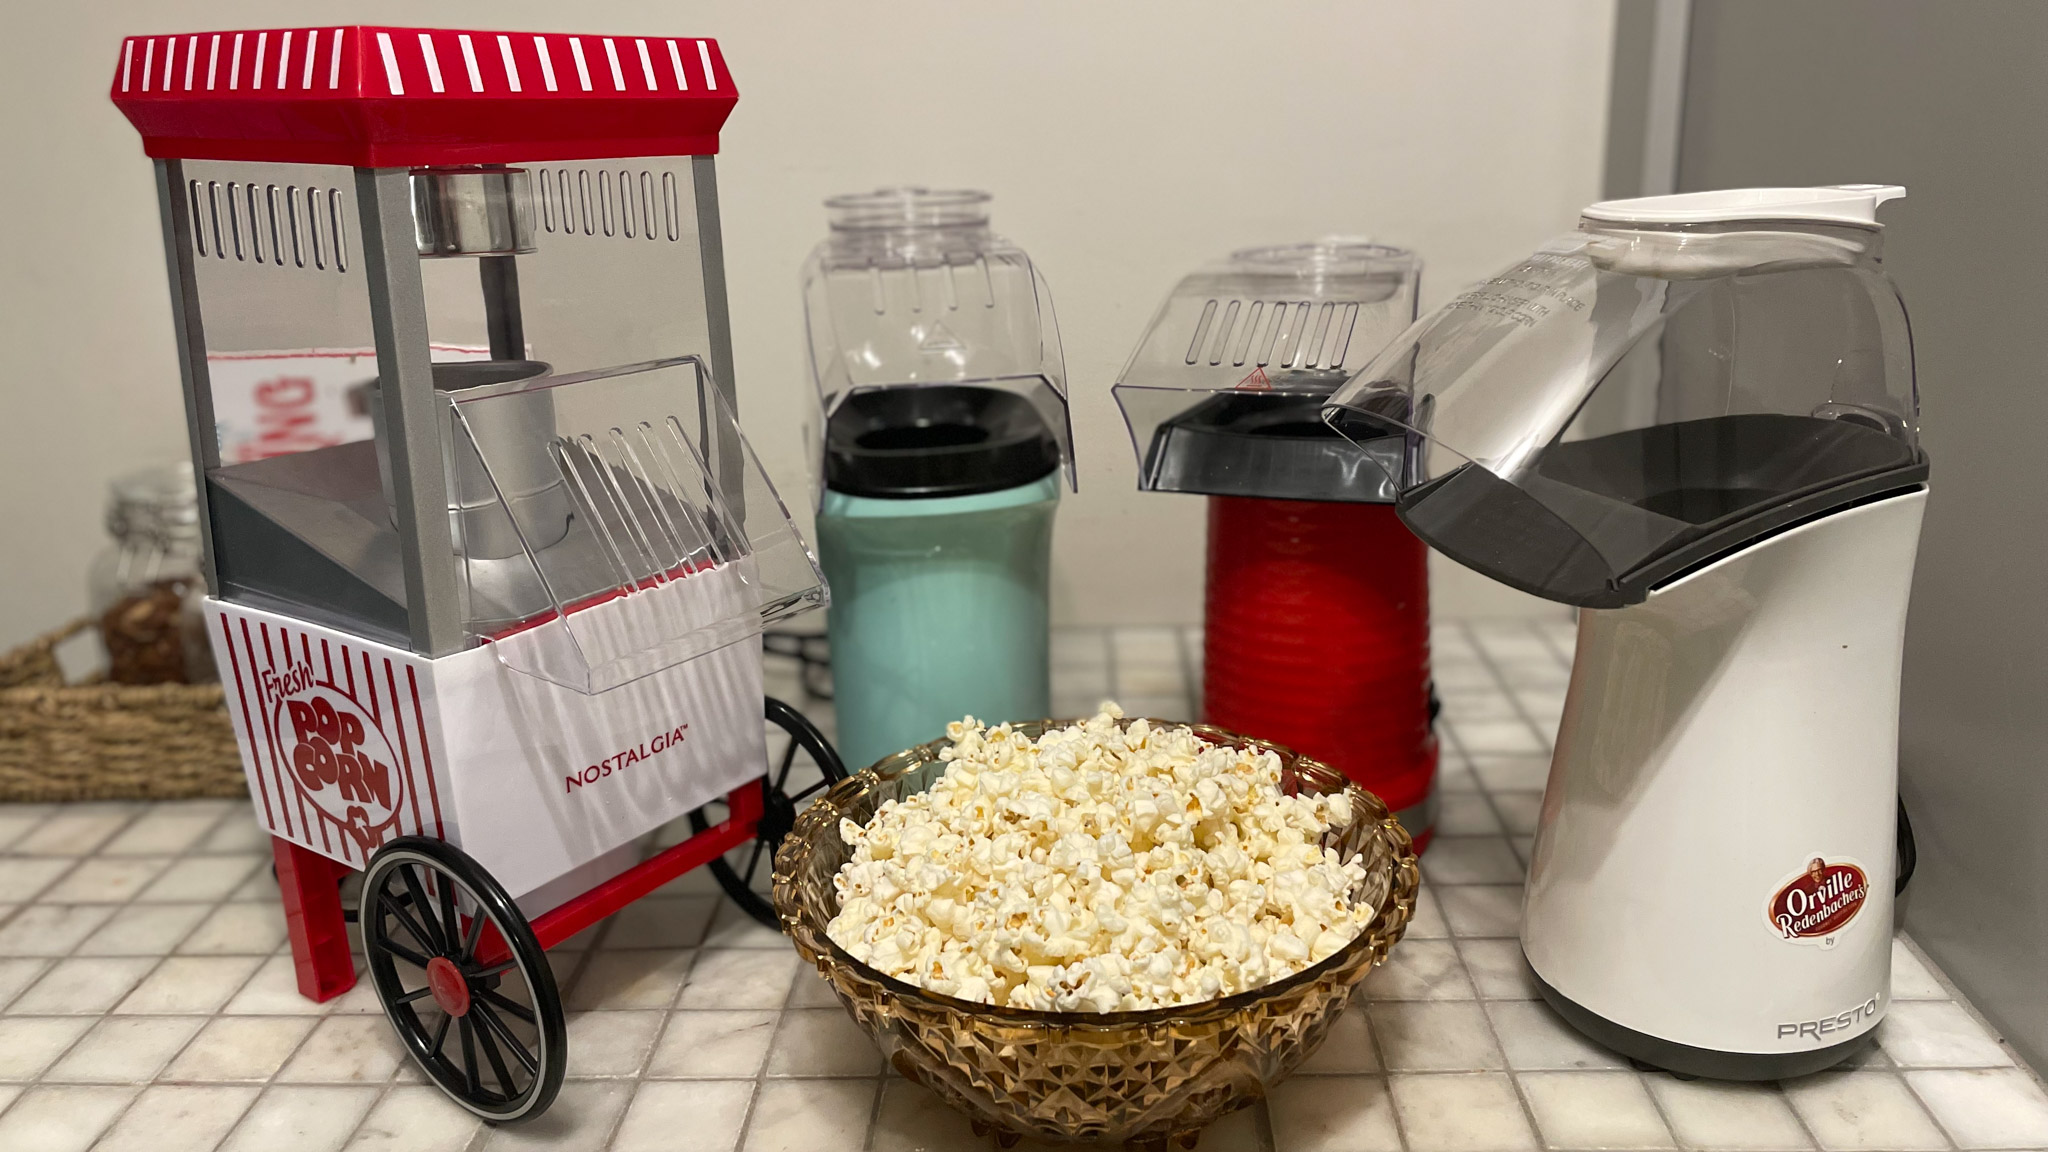 https://www.dontwasteyourmoney.com/wp-content/uploads/2022/02/hot-air-popcorn-makers-all-review-ub-2.jpg